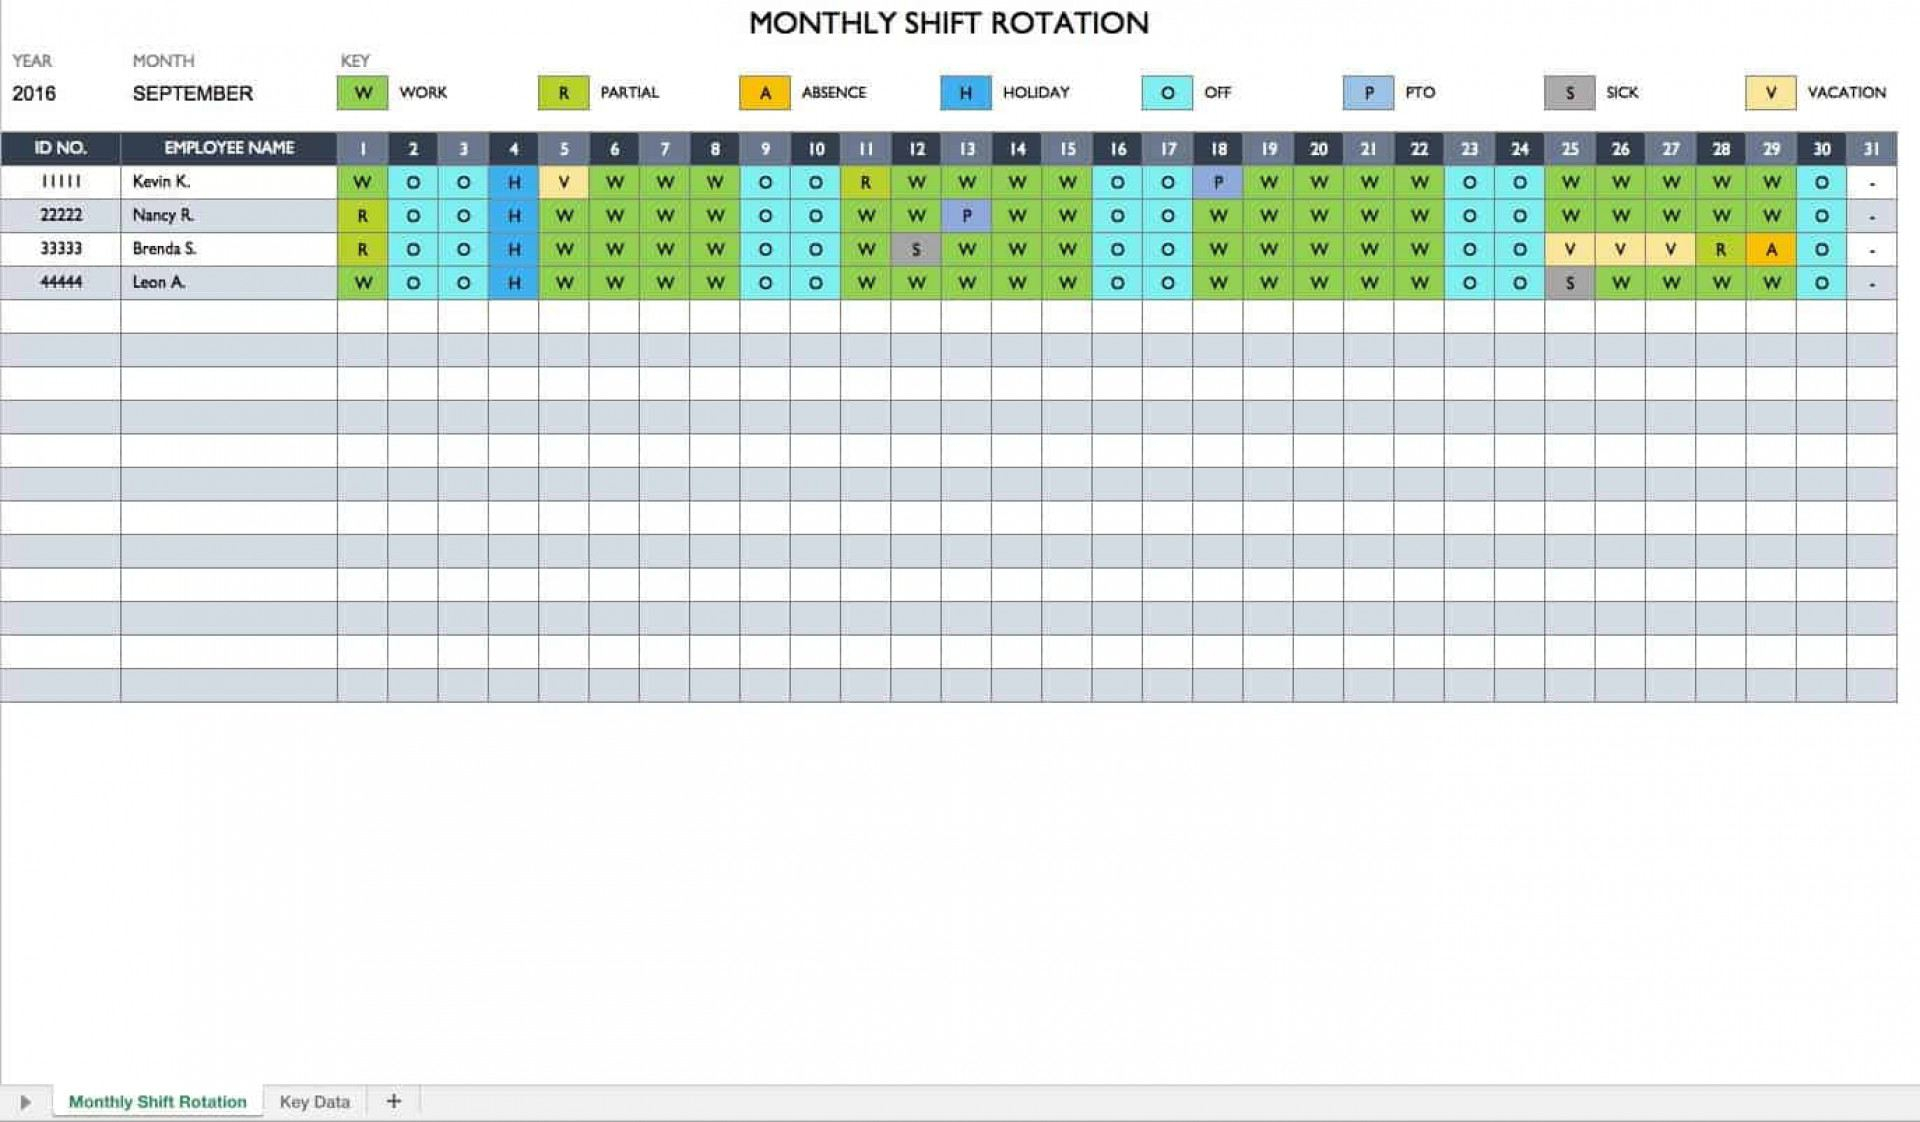 Dupont Rotating Shift Schedule Template Excel ~ Addictionary